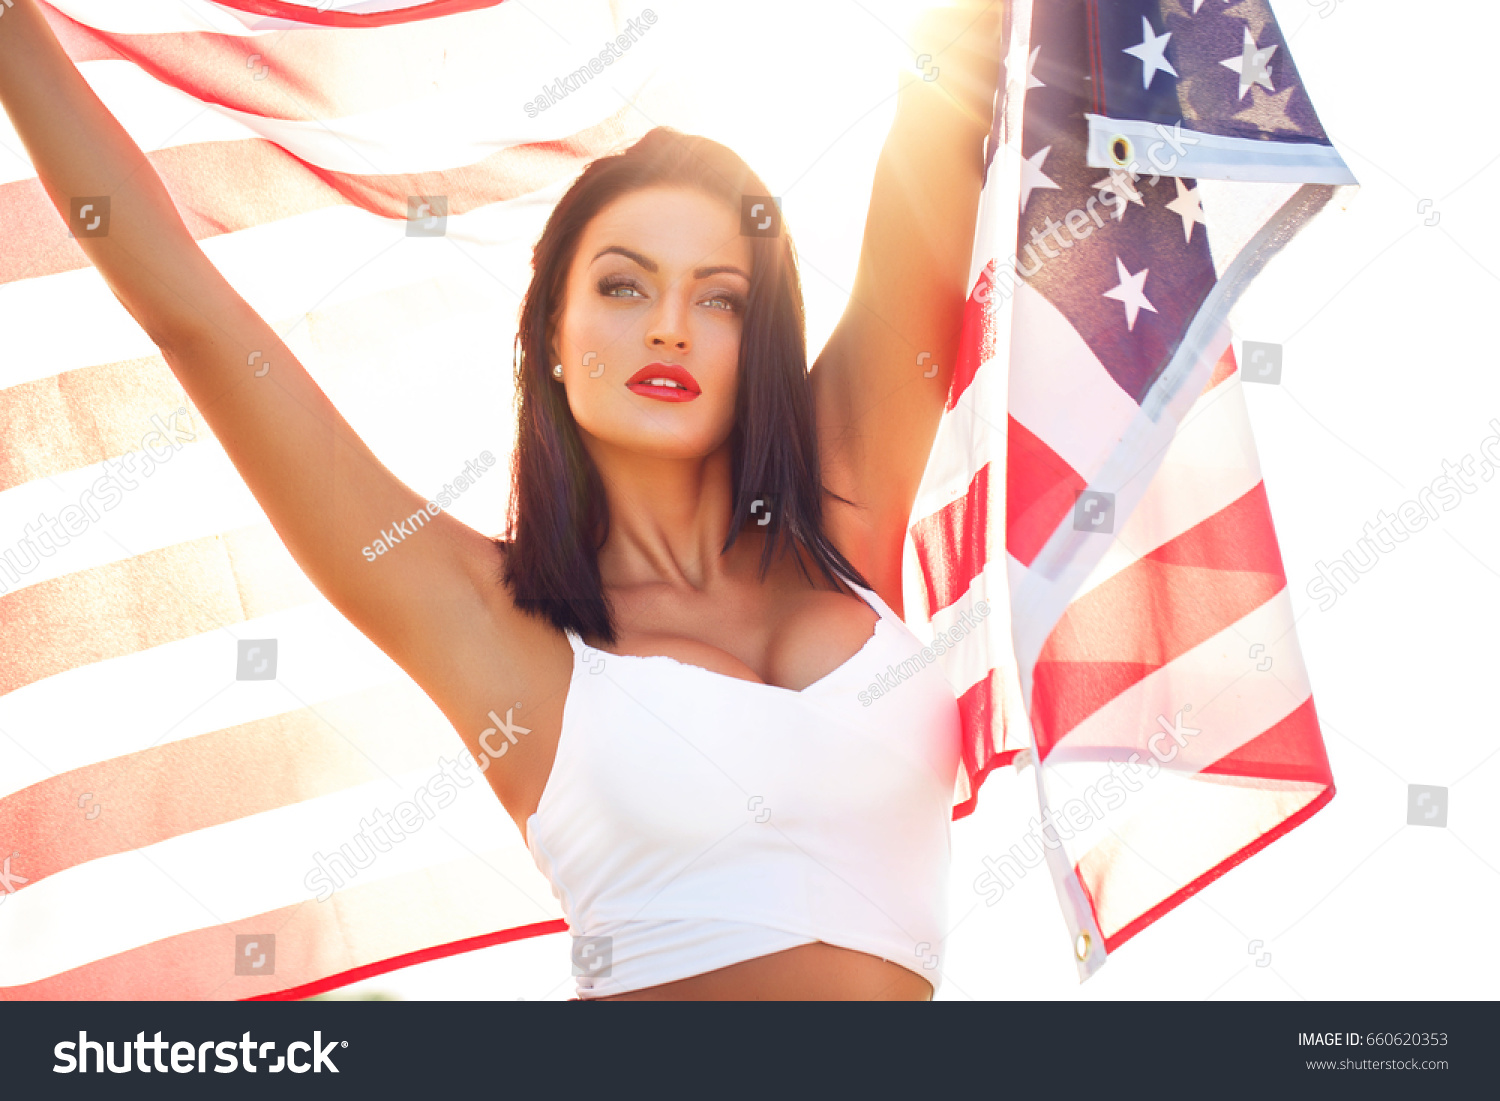 cameron netherton add photo sexy 4th of july pictures